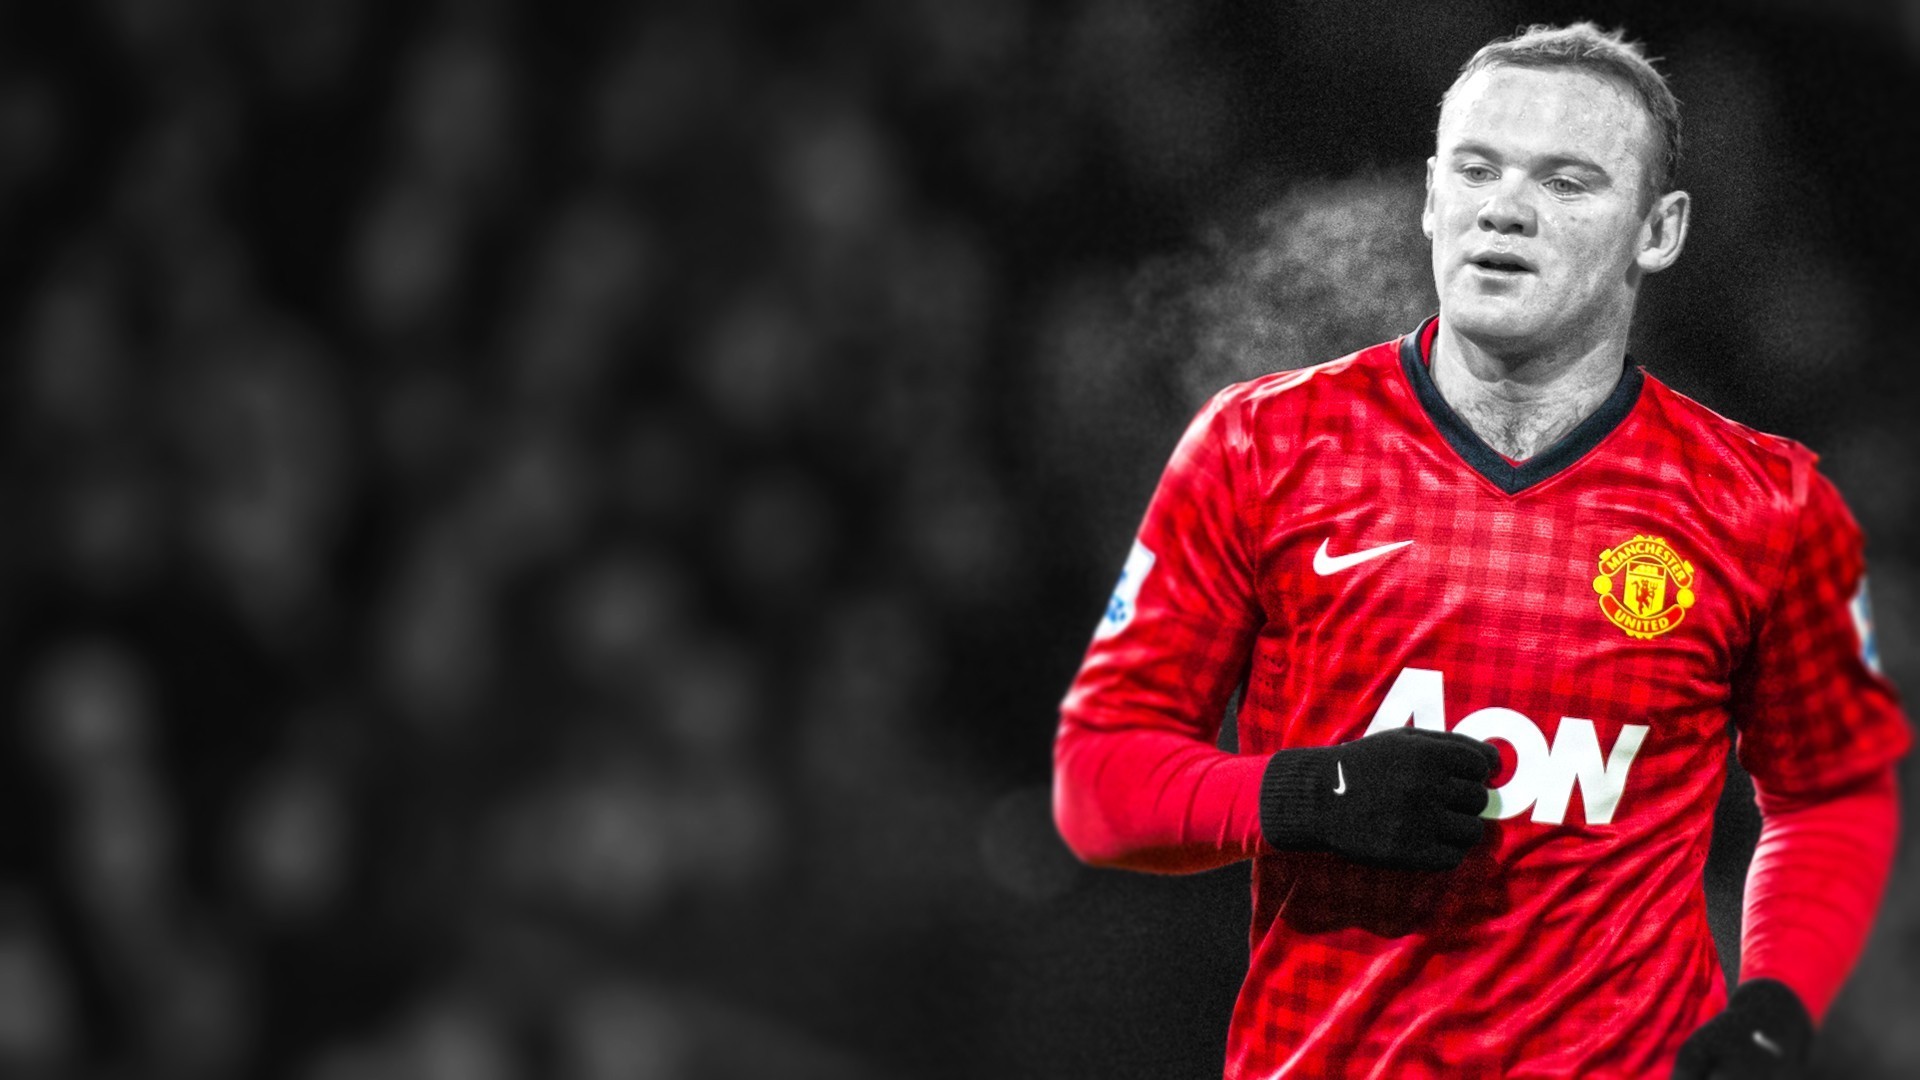 1920x1080 Wayne Rooney hd photos,Wayne Rooney new images and wallpapers